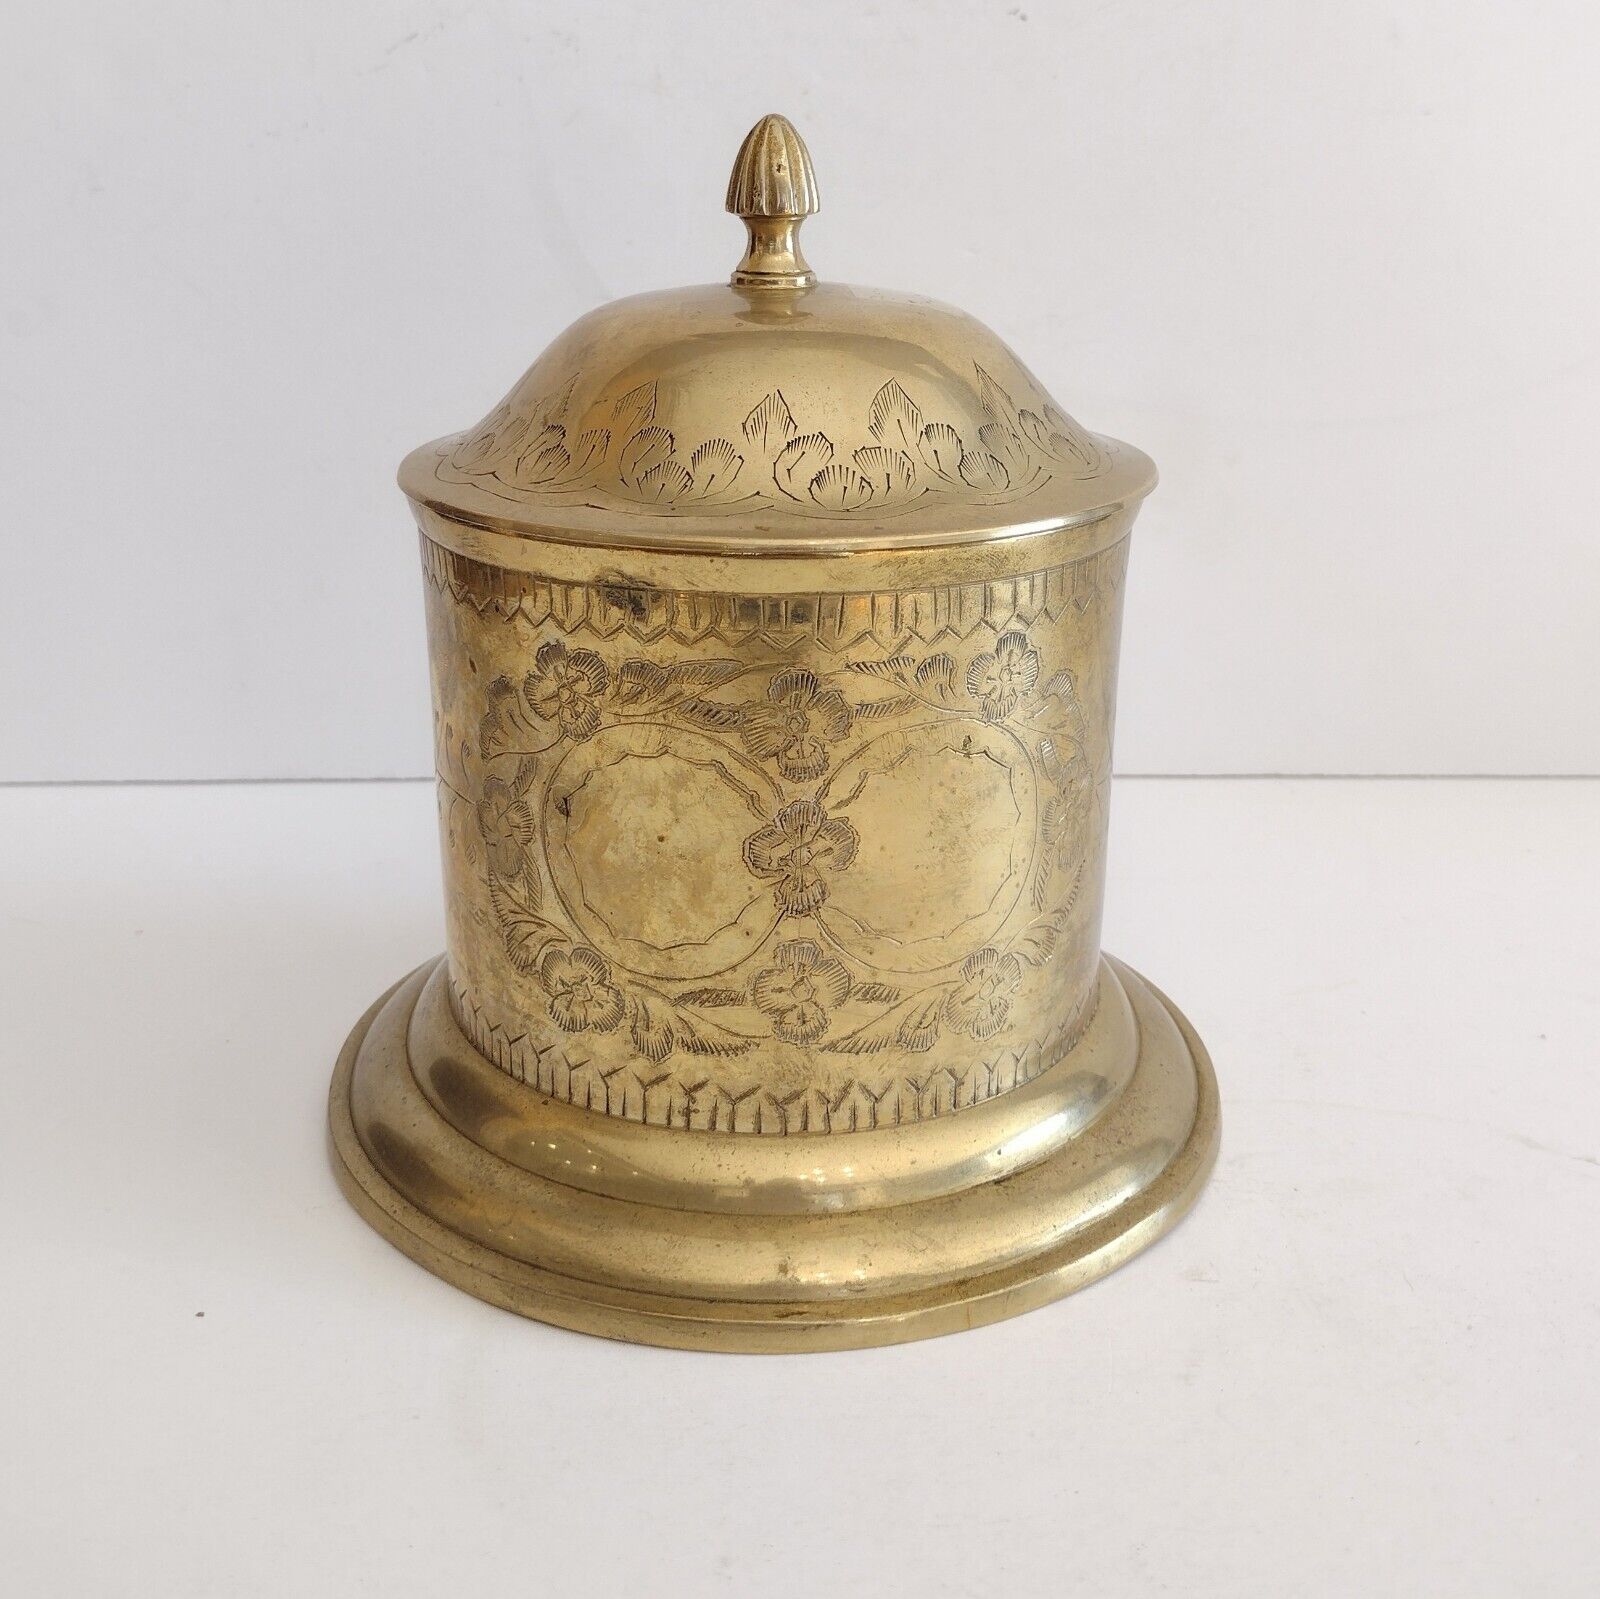 Vintage Brass Silver Plated Tea Caddy Tobacco Tin Gold Ornate Round Lidded